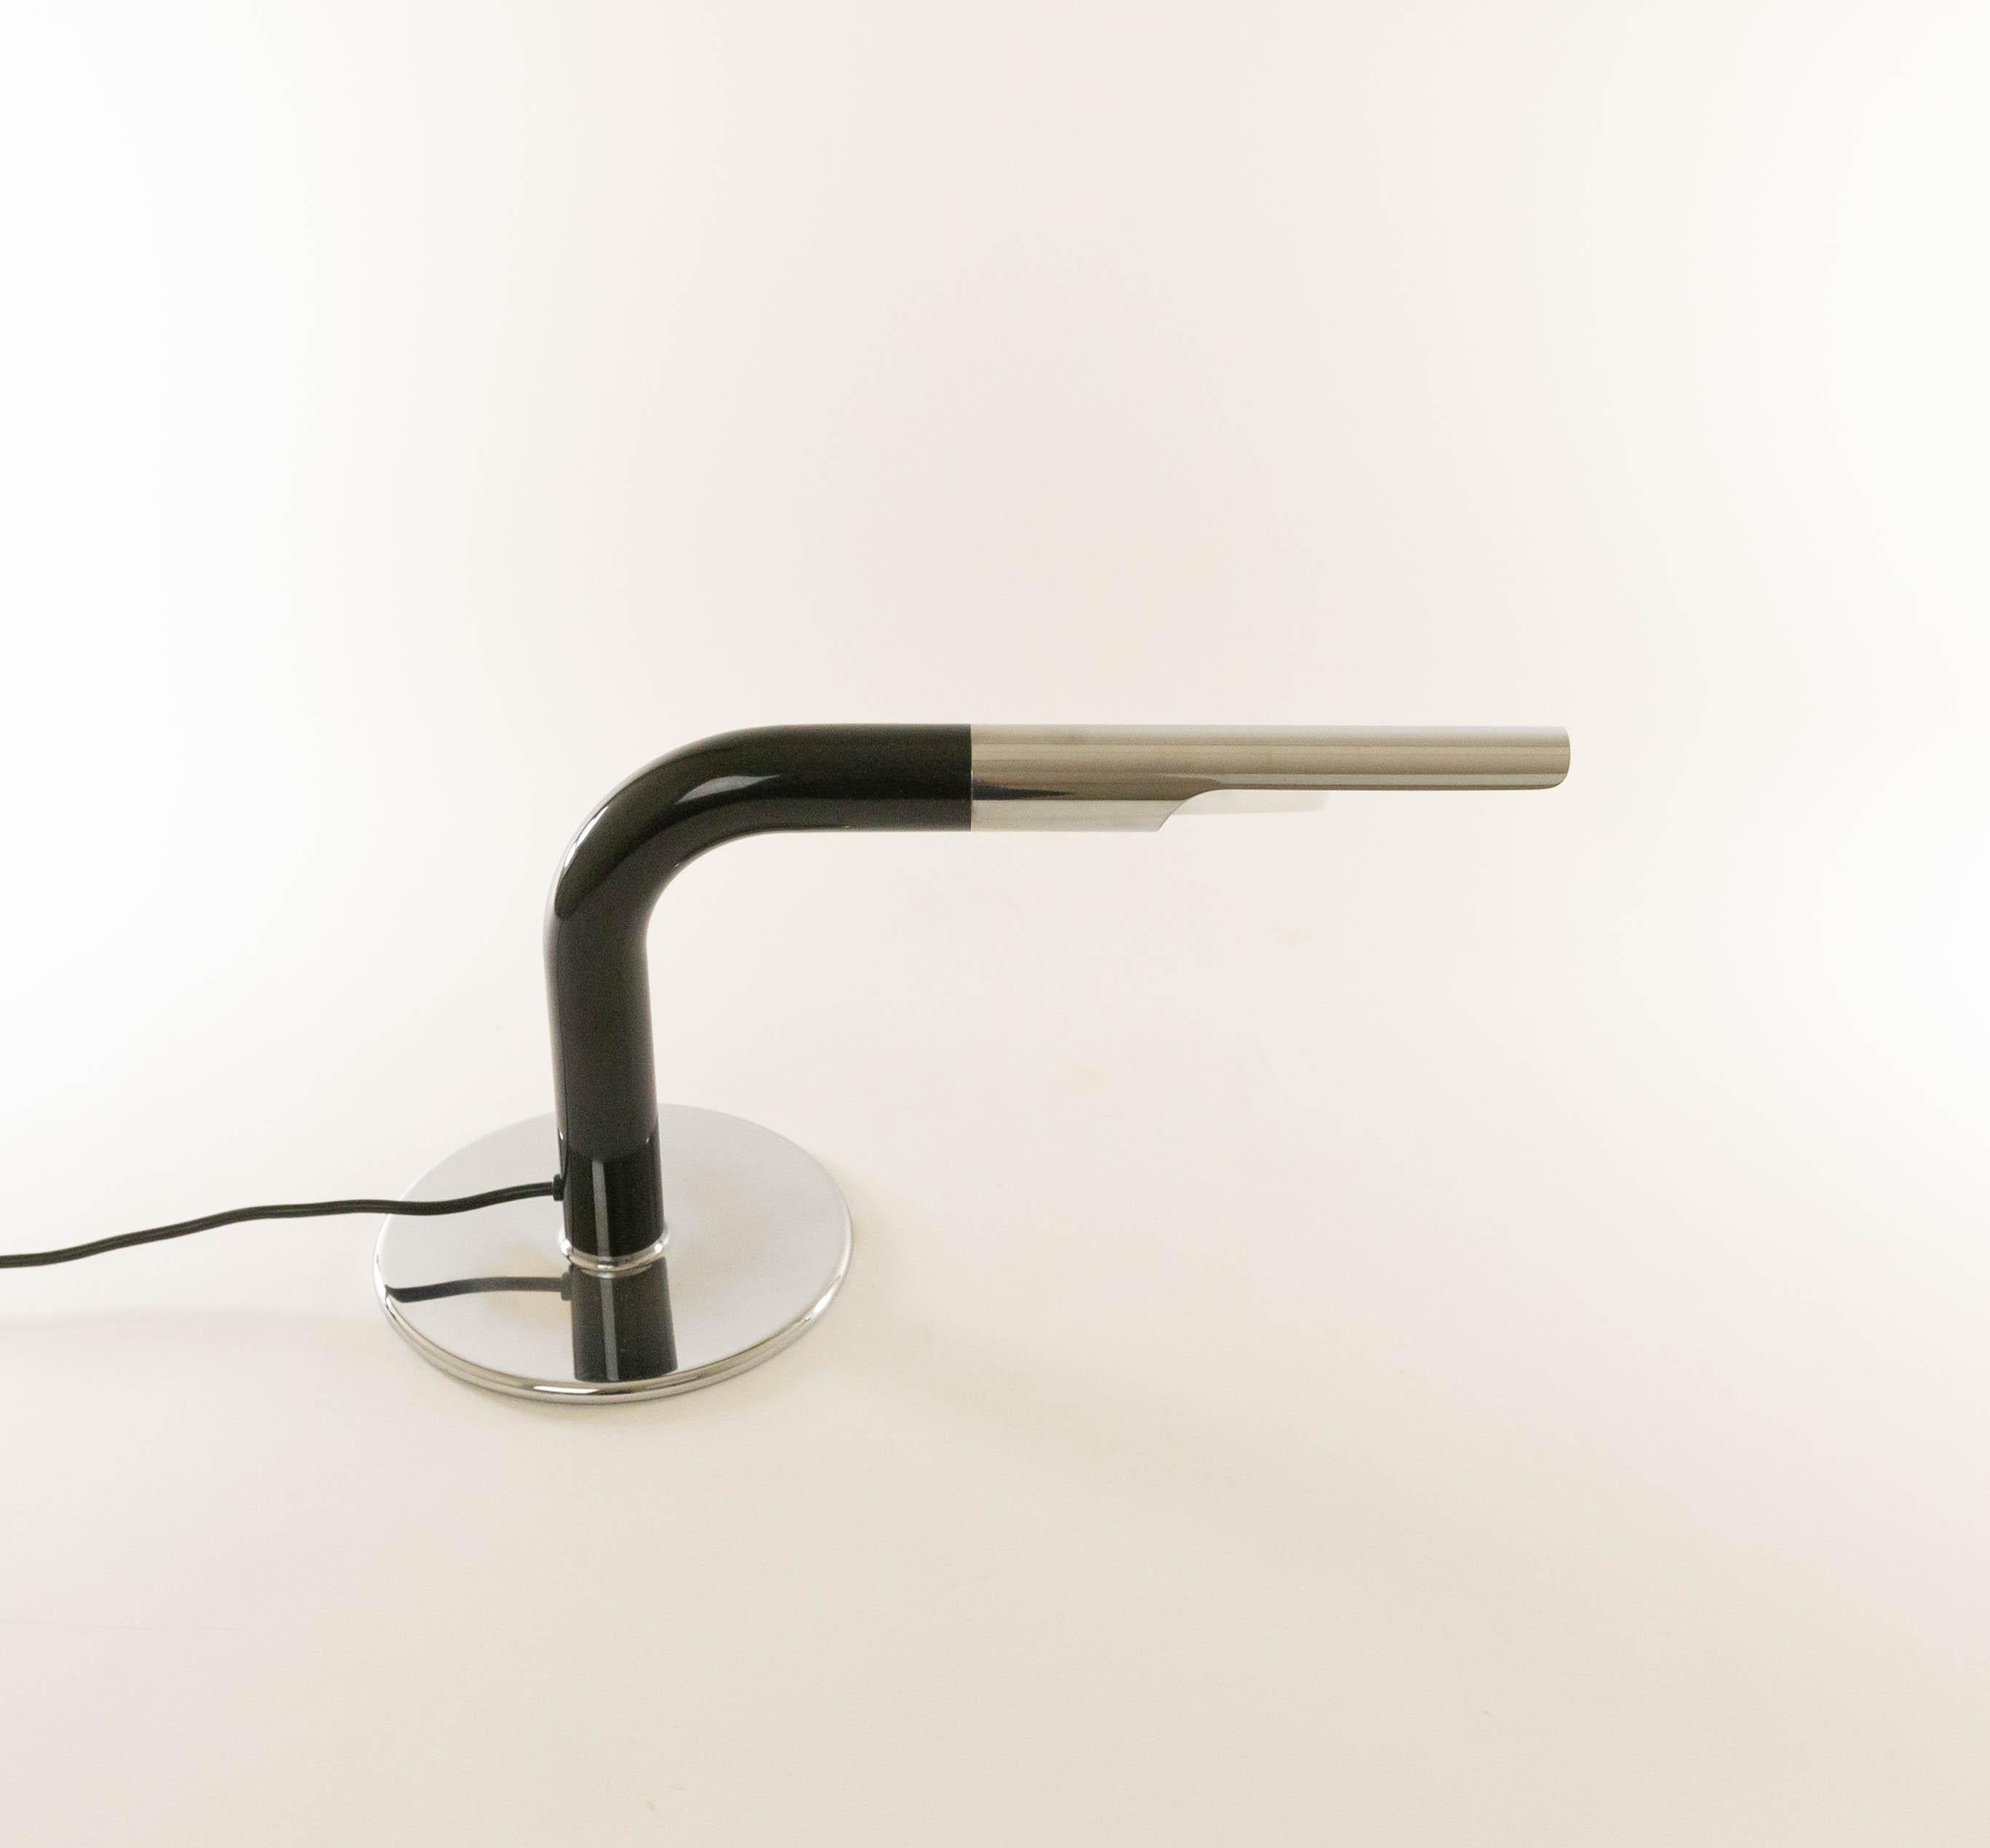 Gulp table lamp designed by Ingo Maurer and produced by his own company Design M. The tubular shaped lamp was designed in 1969 and it is made of chrome and black lacquered metal.

The condition of the lamp is very good. 

Gulp is part of the